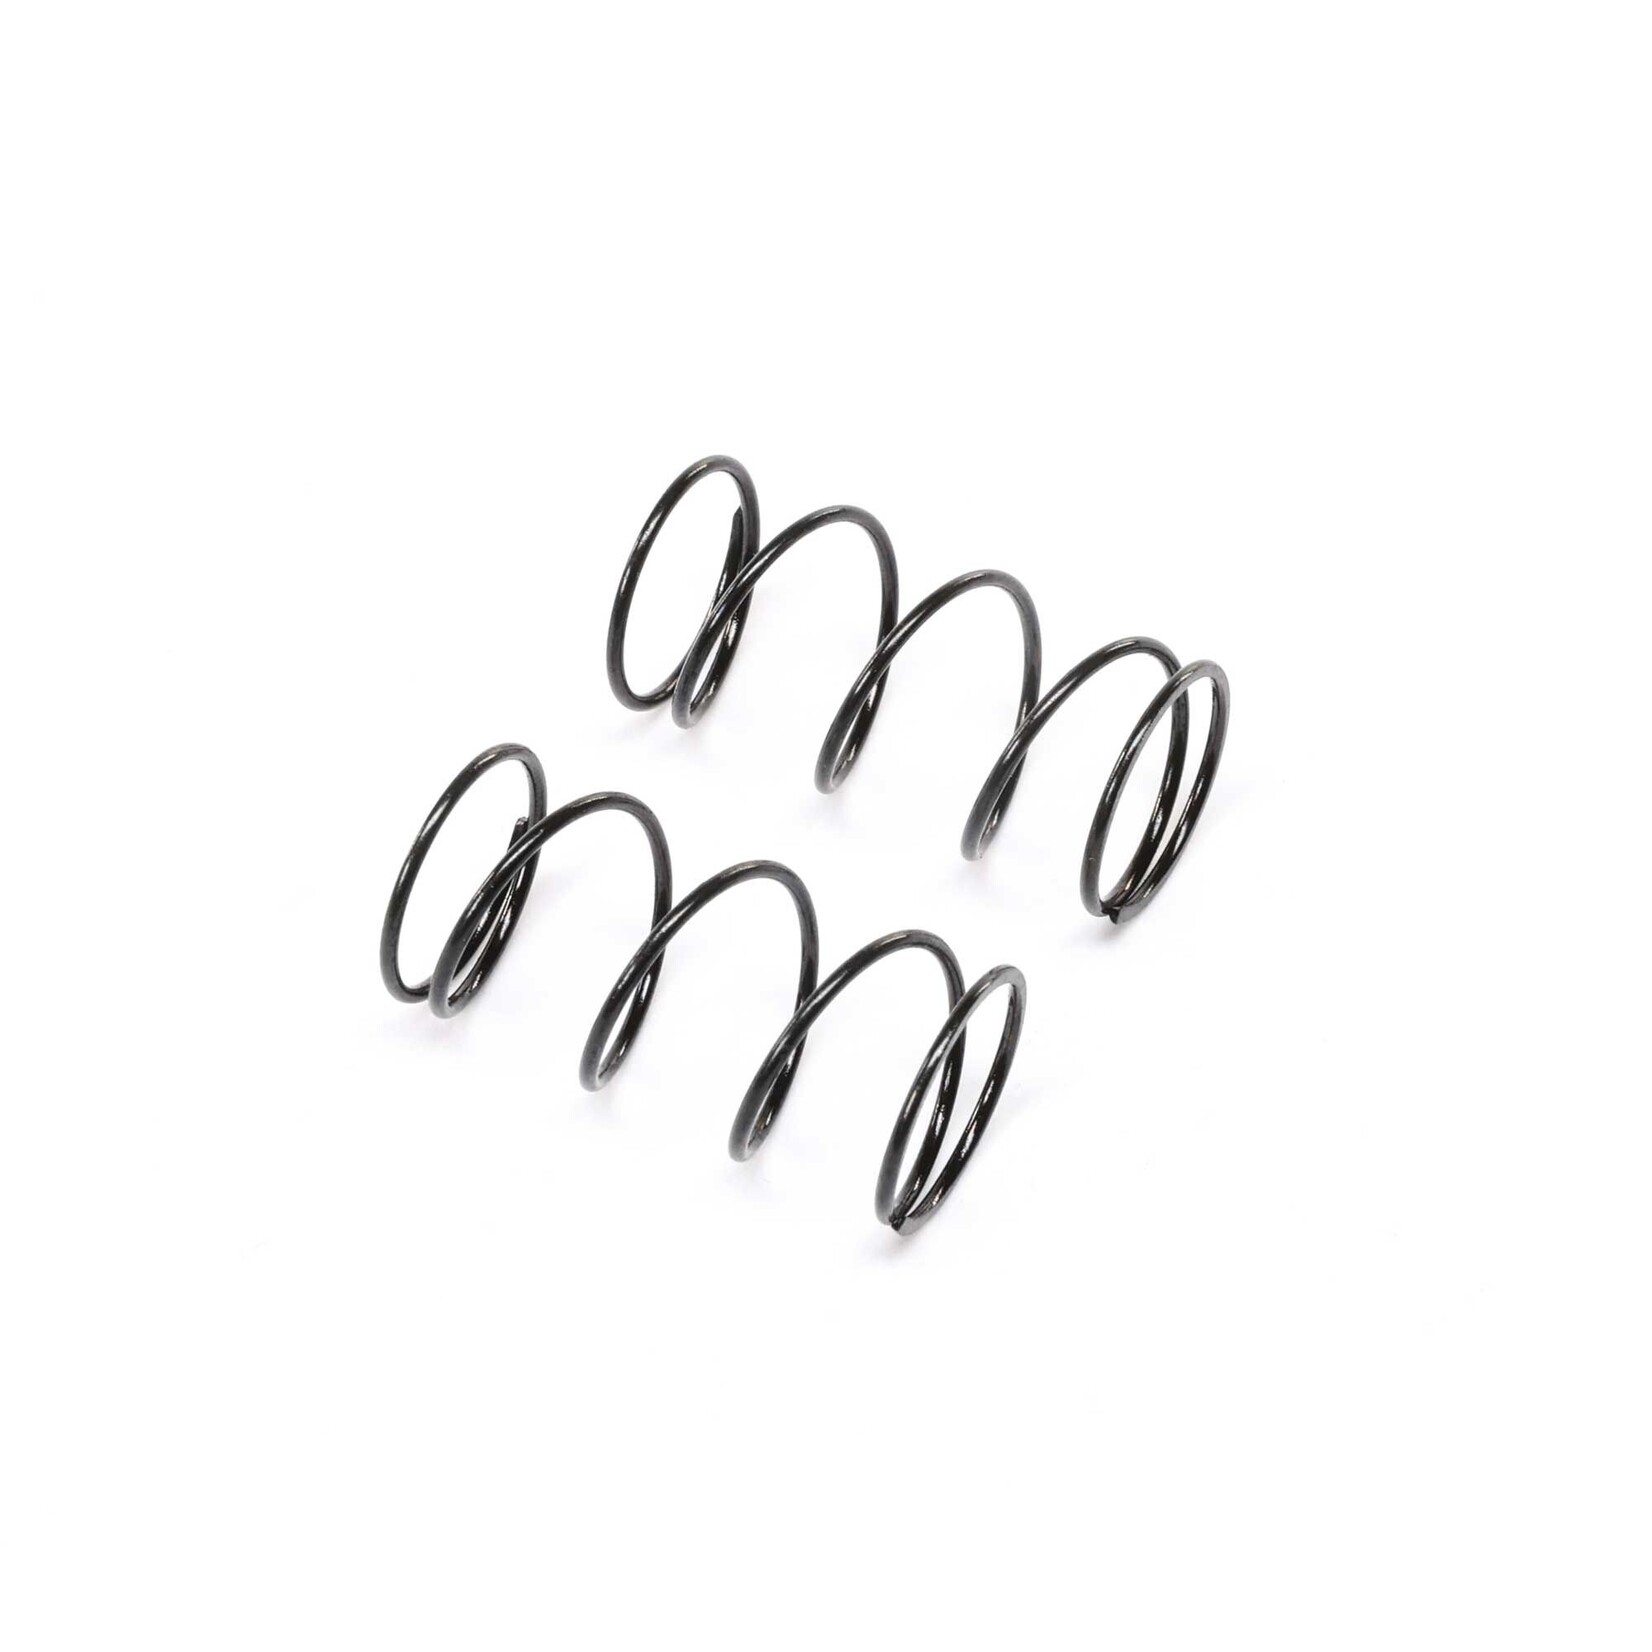 Team Losi Racing (TLR) Front Spring 3.8lb/in: Mini-B, BL